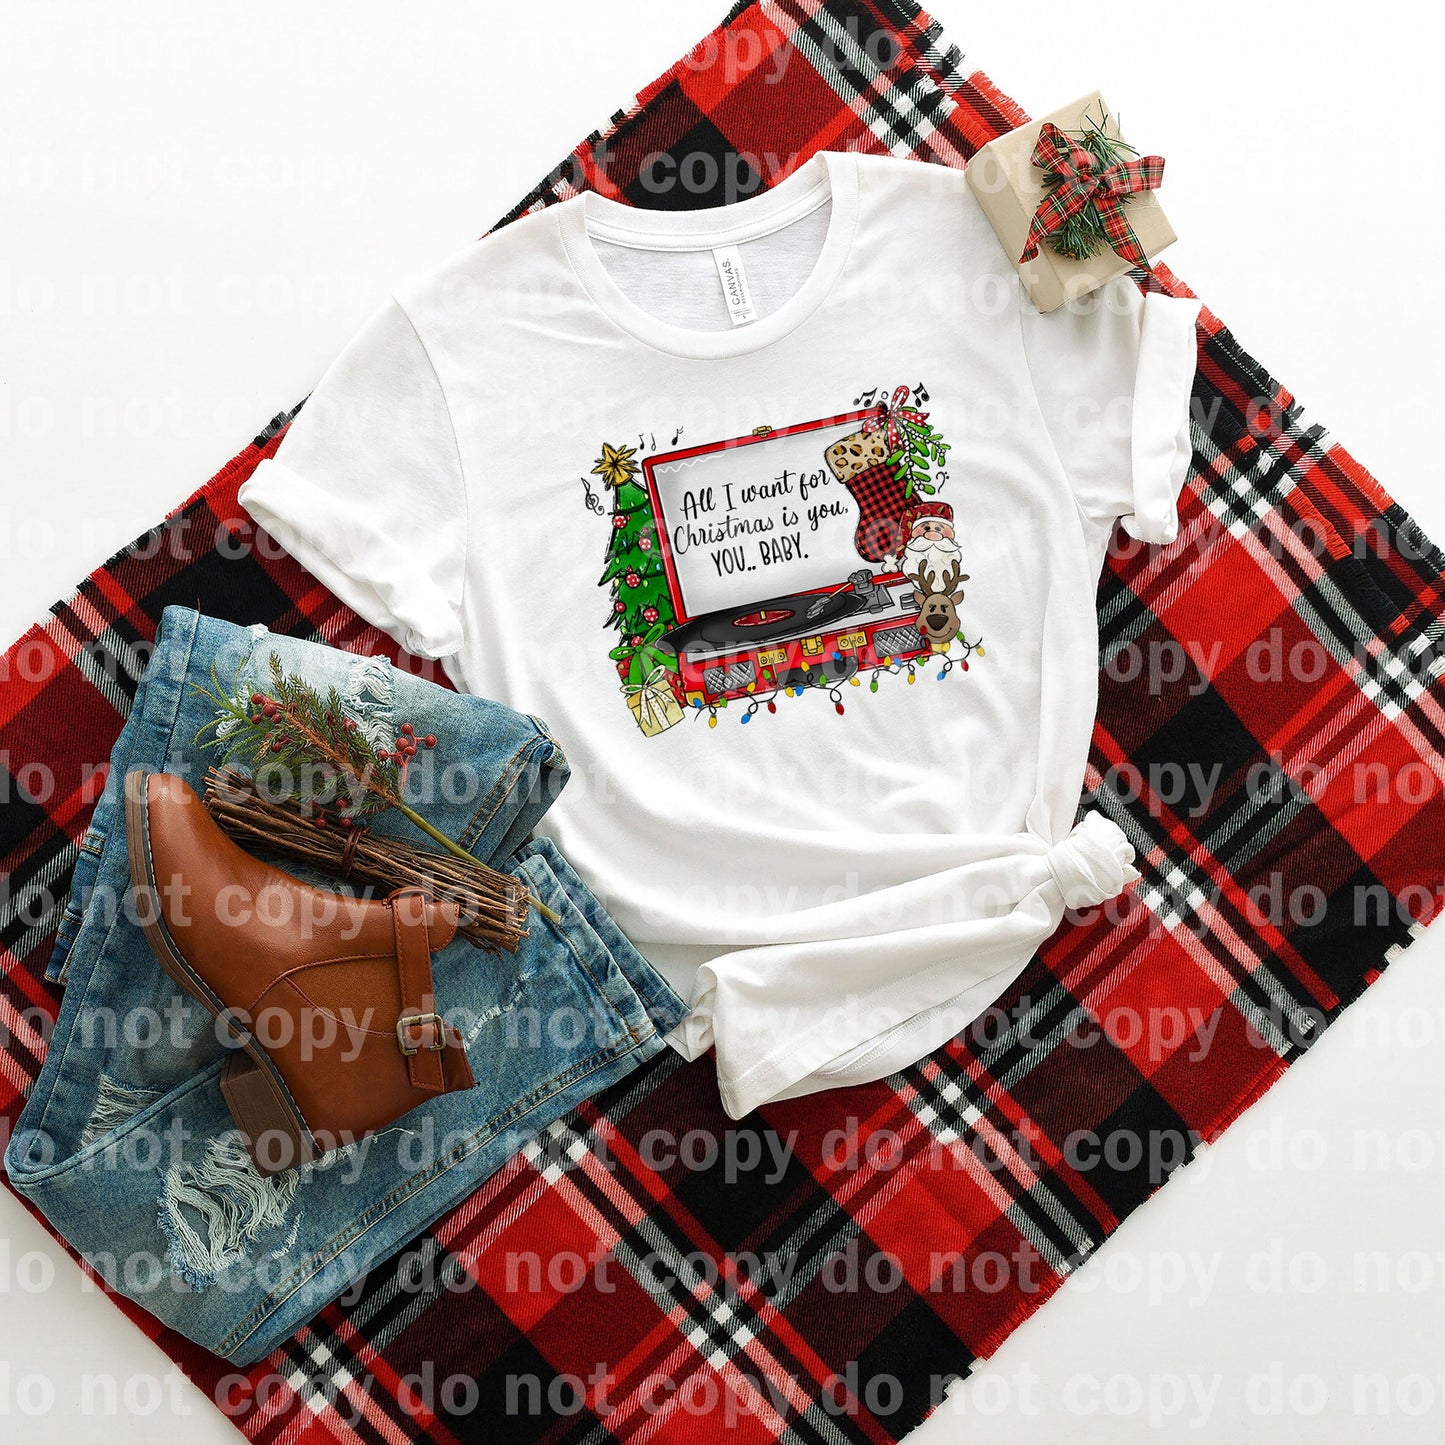 All I Want For Christmas Is You You Baby Dream Print or Sublimation Print